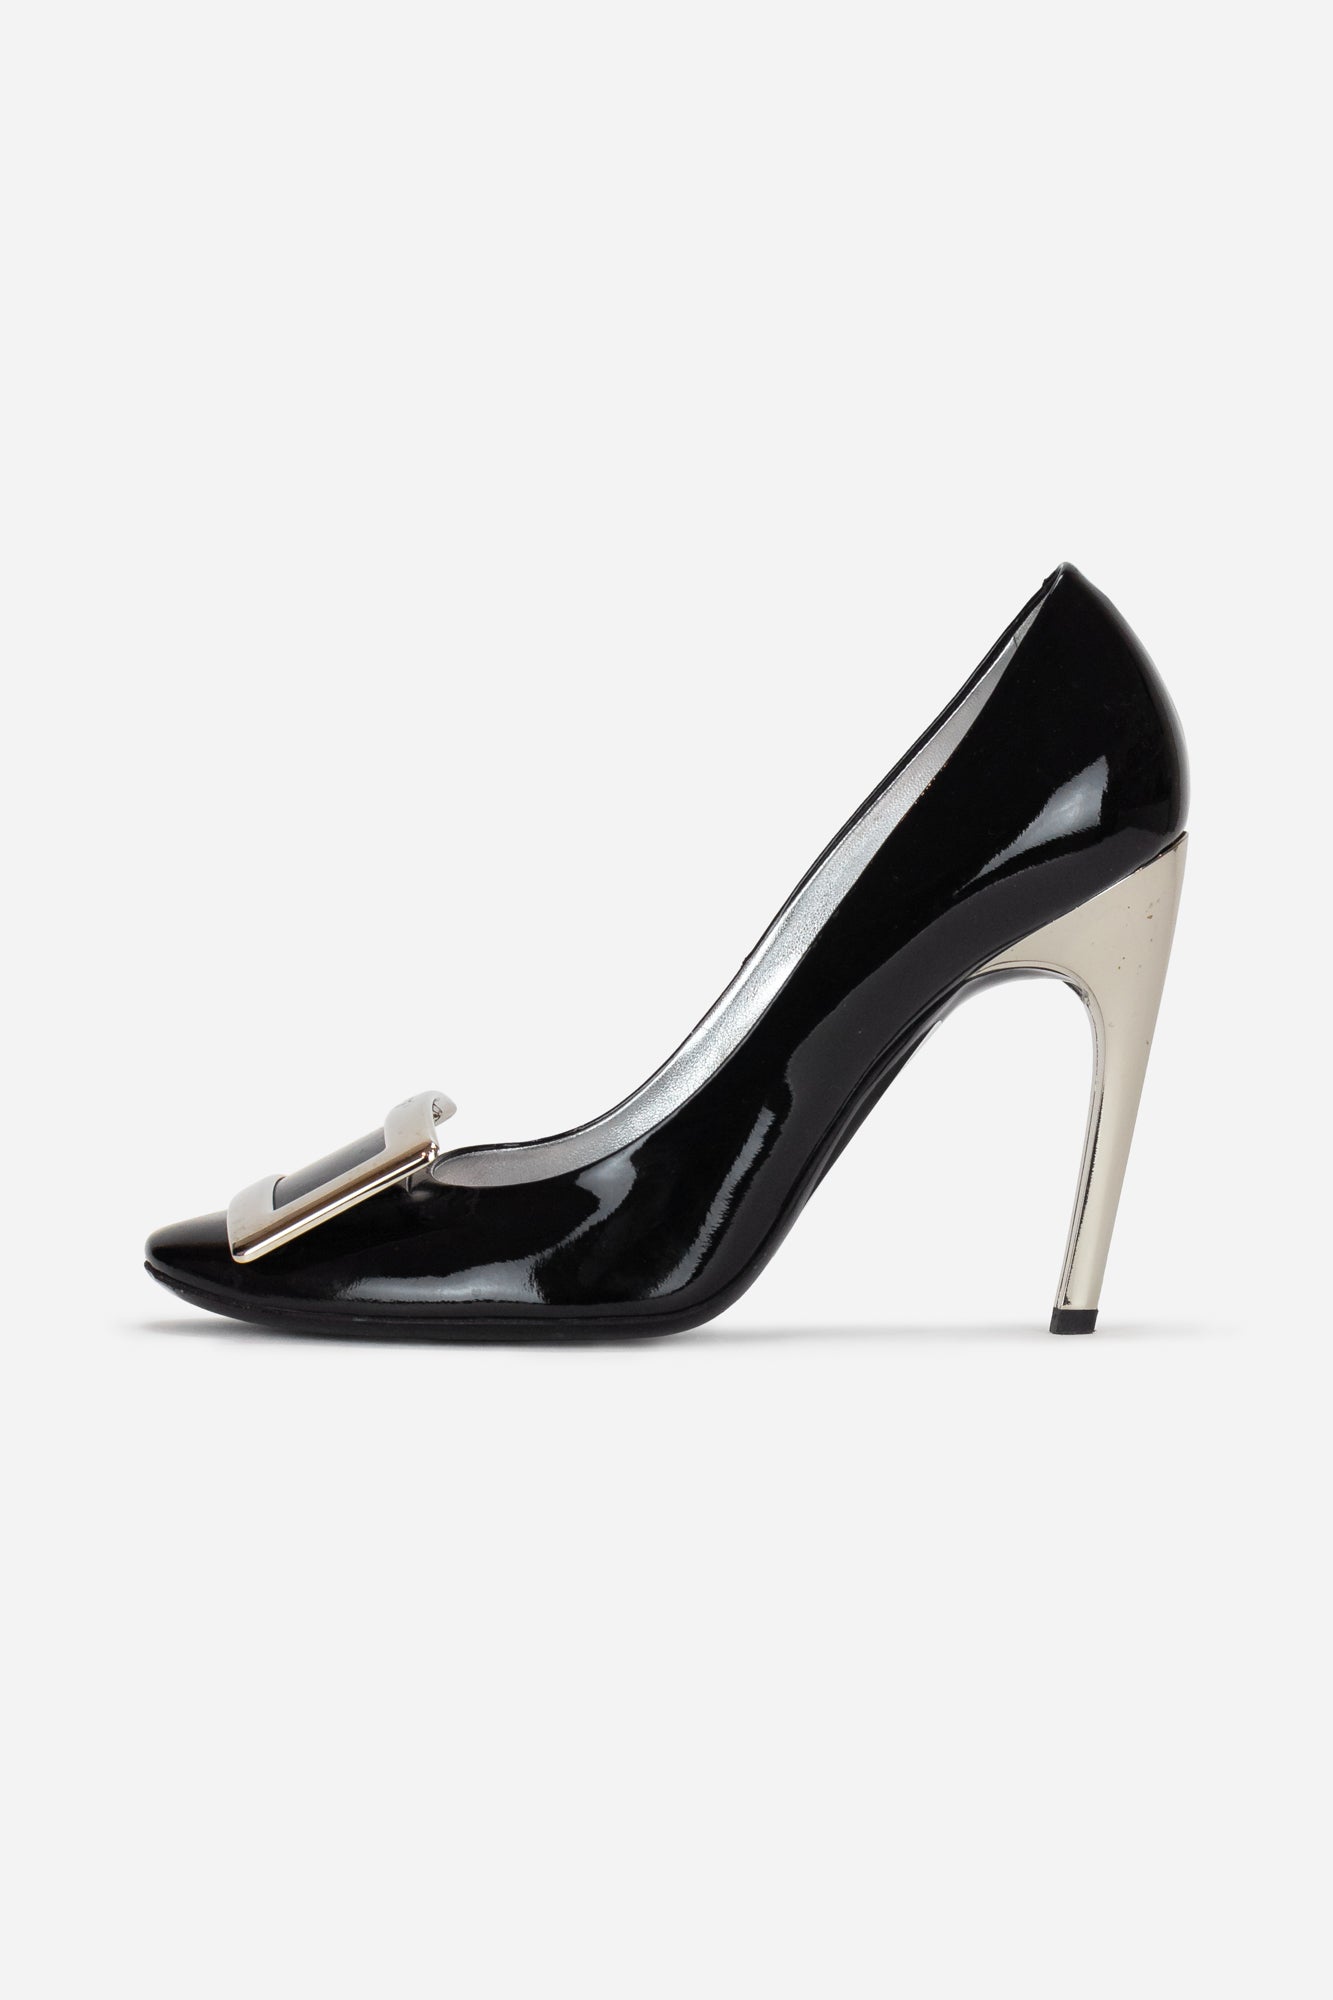 Black Patent Pumps With Silver Buckle